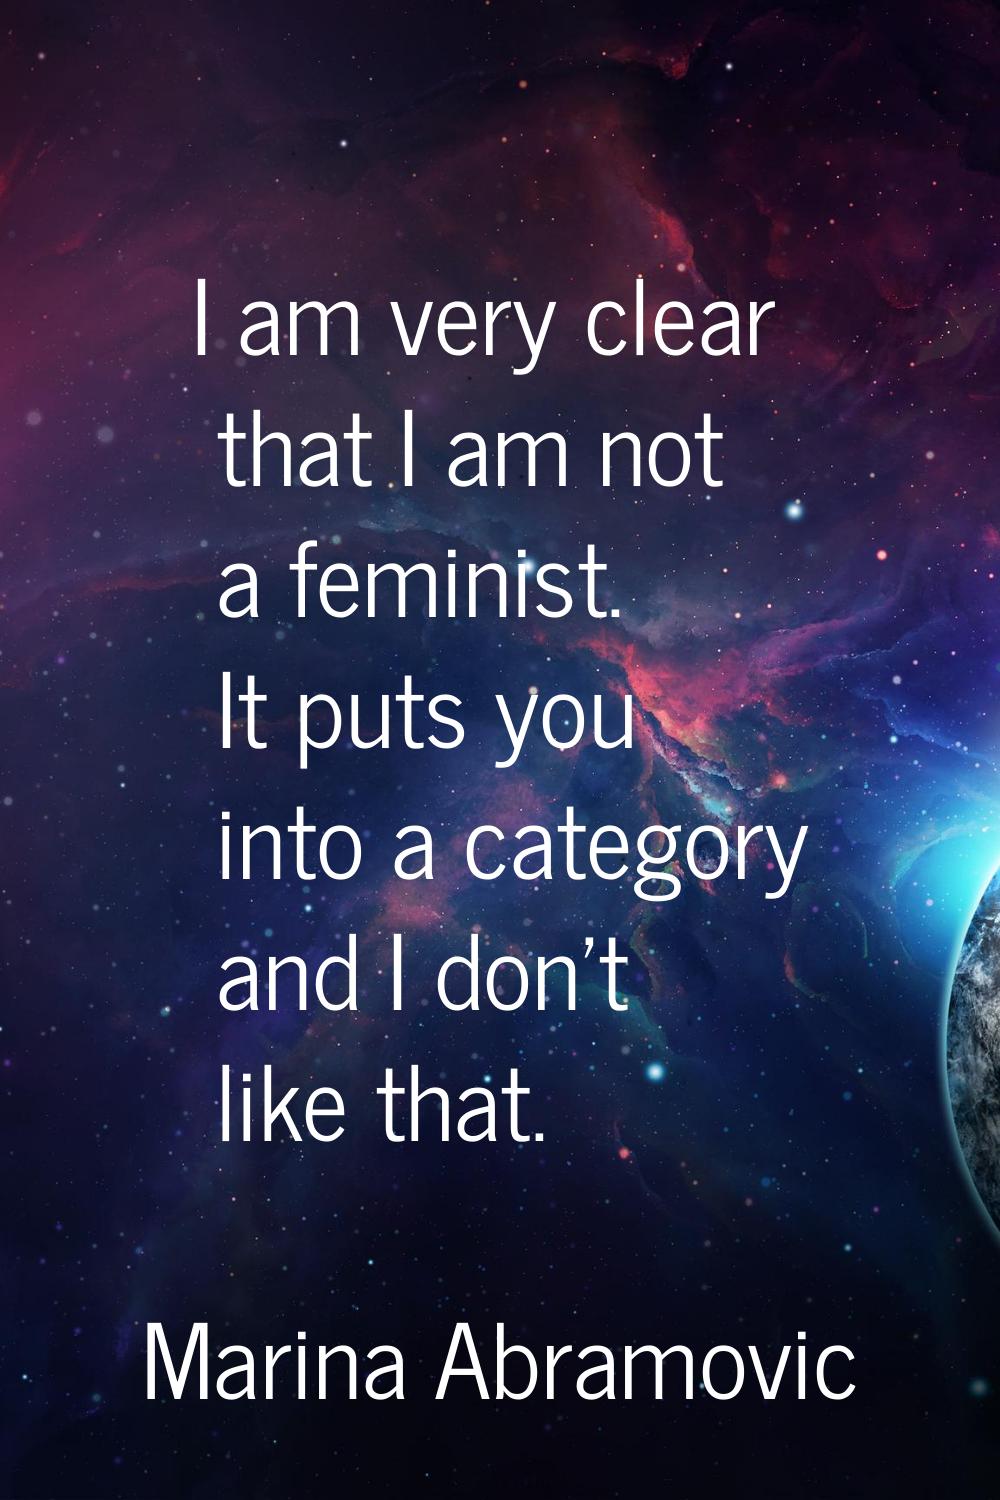 I am very clear that I am not a feminist. It puts you into a category and I don't like that.